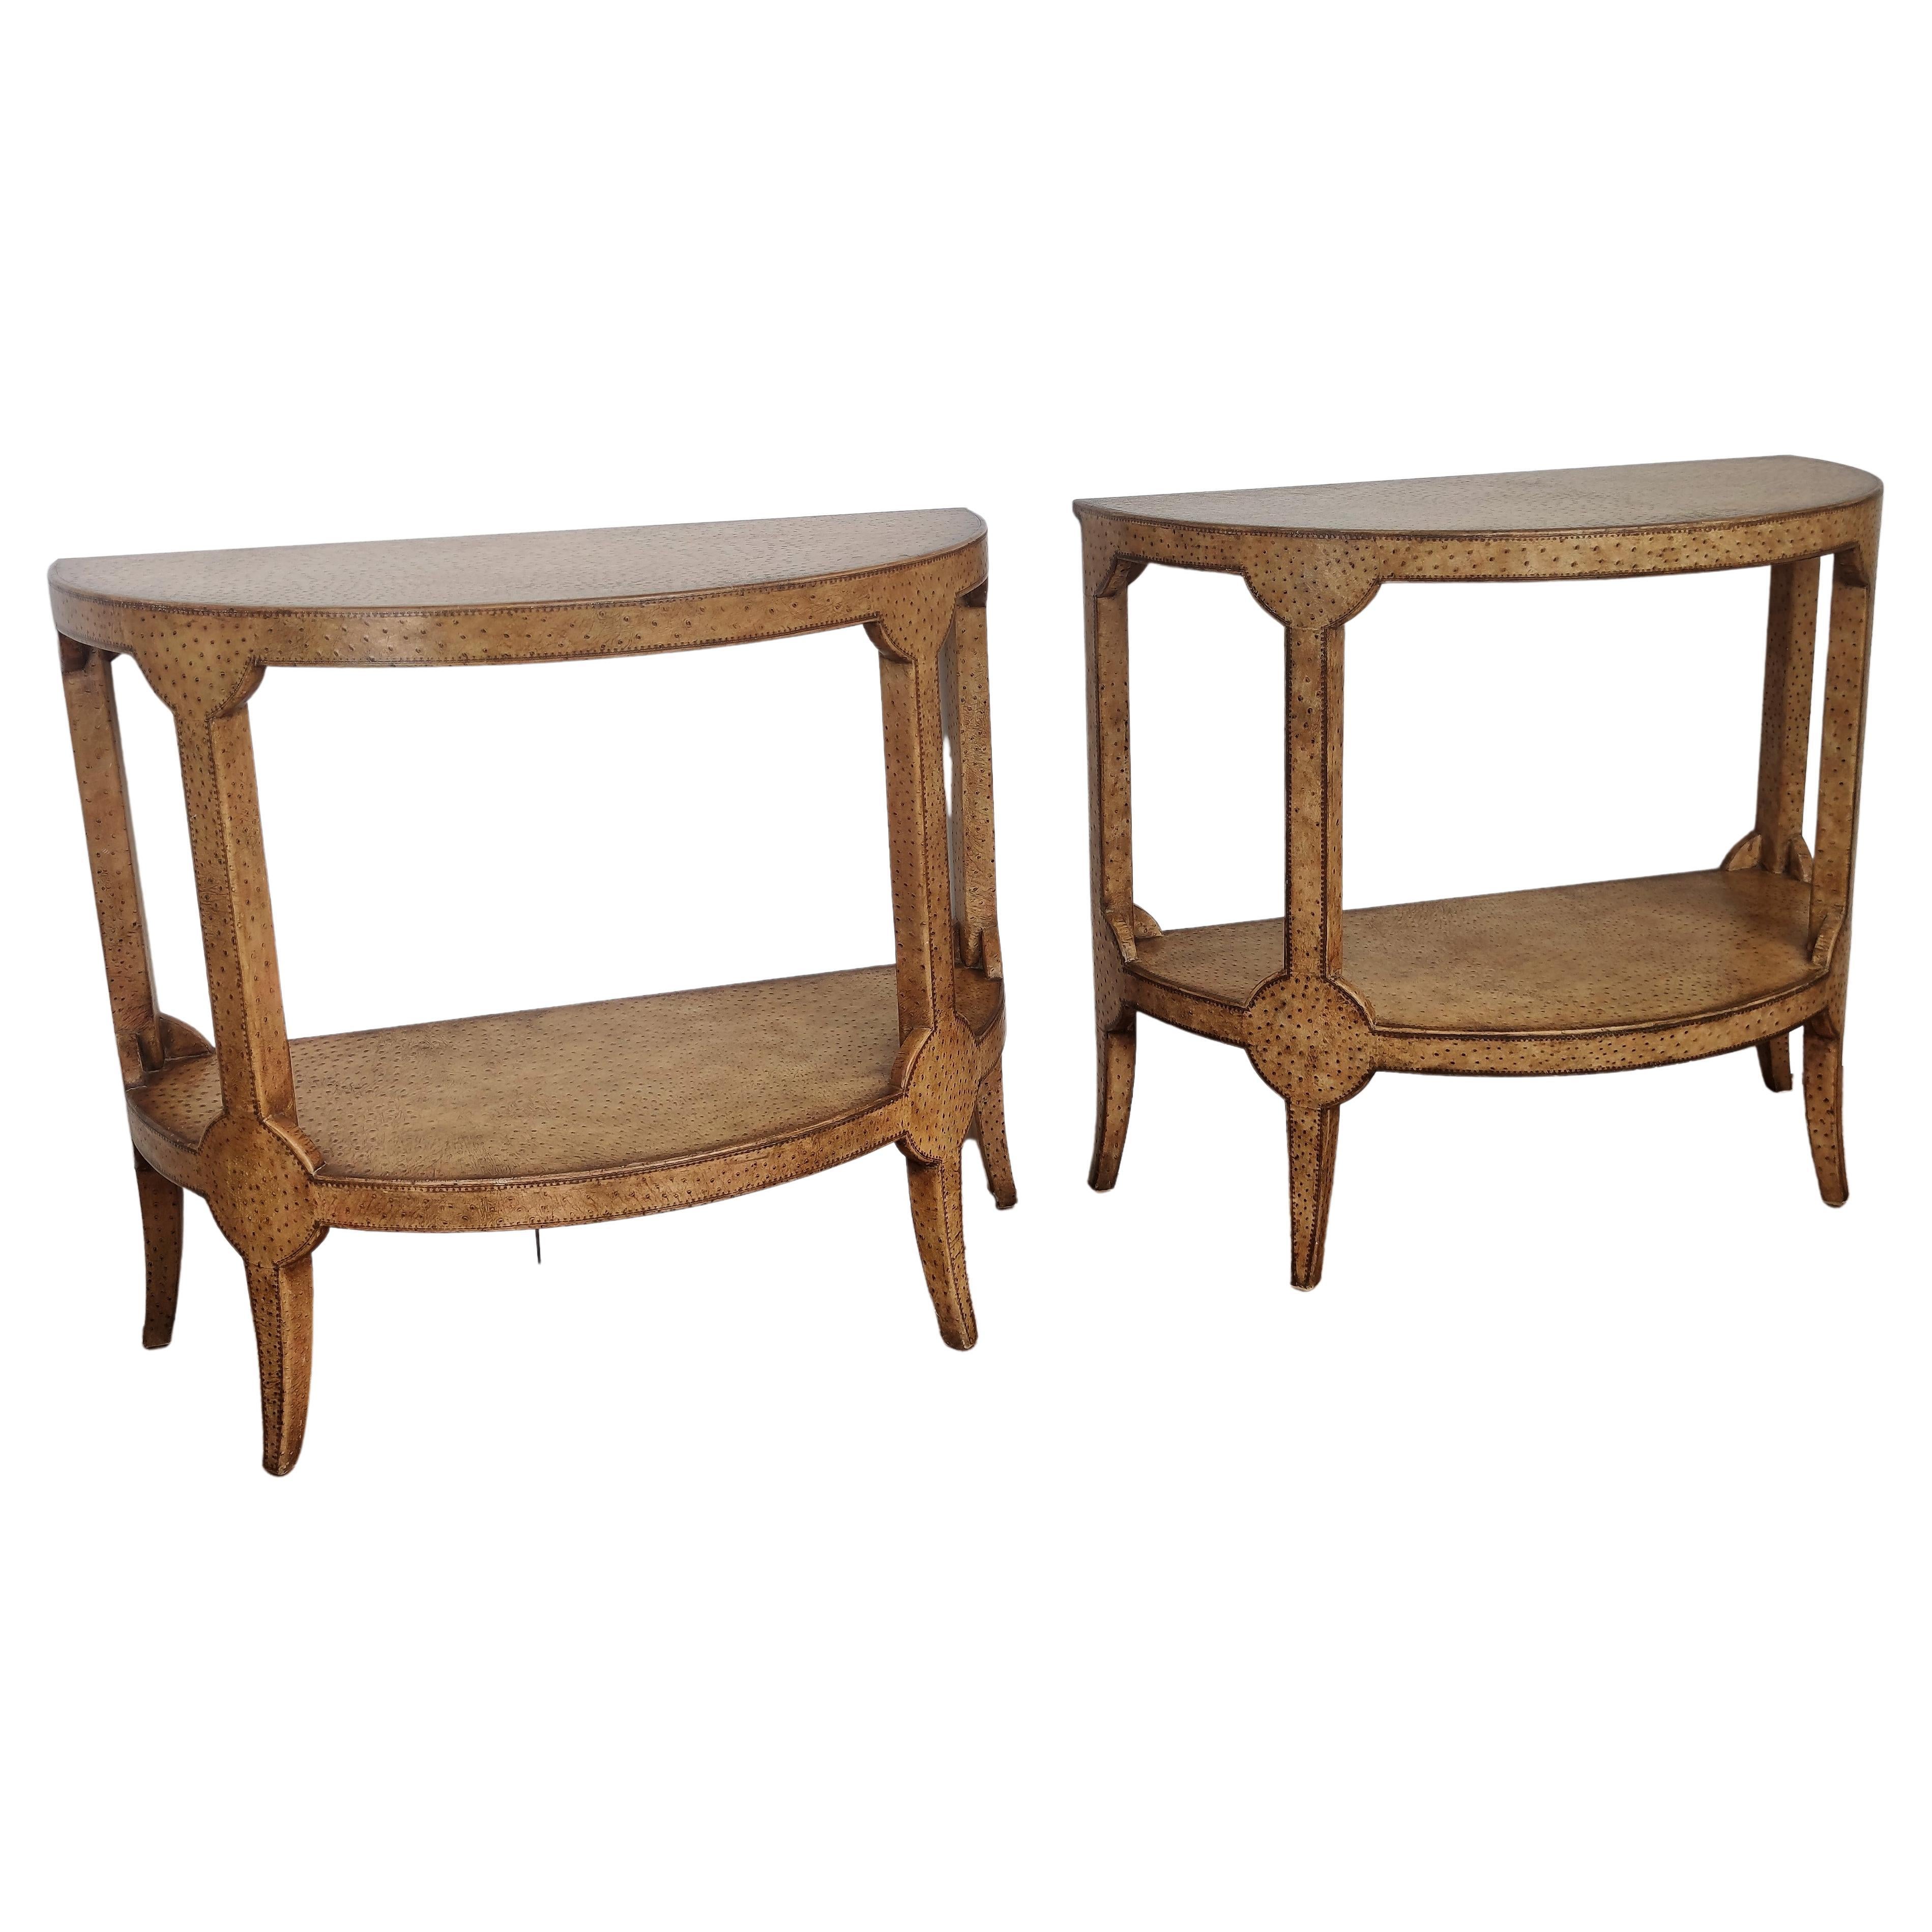 Pair of Midcentury Ostrich Demilune Console Tables